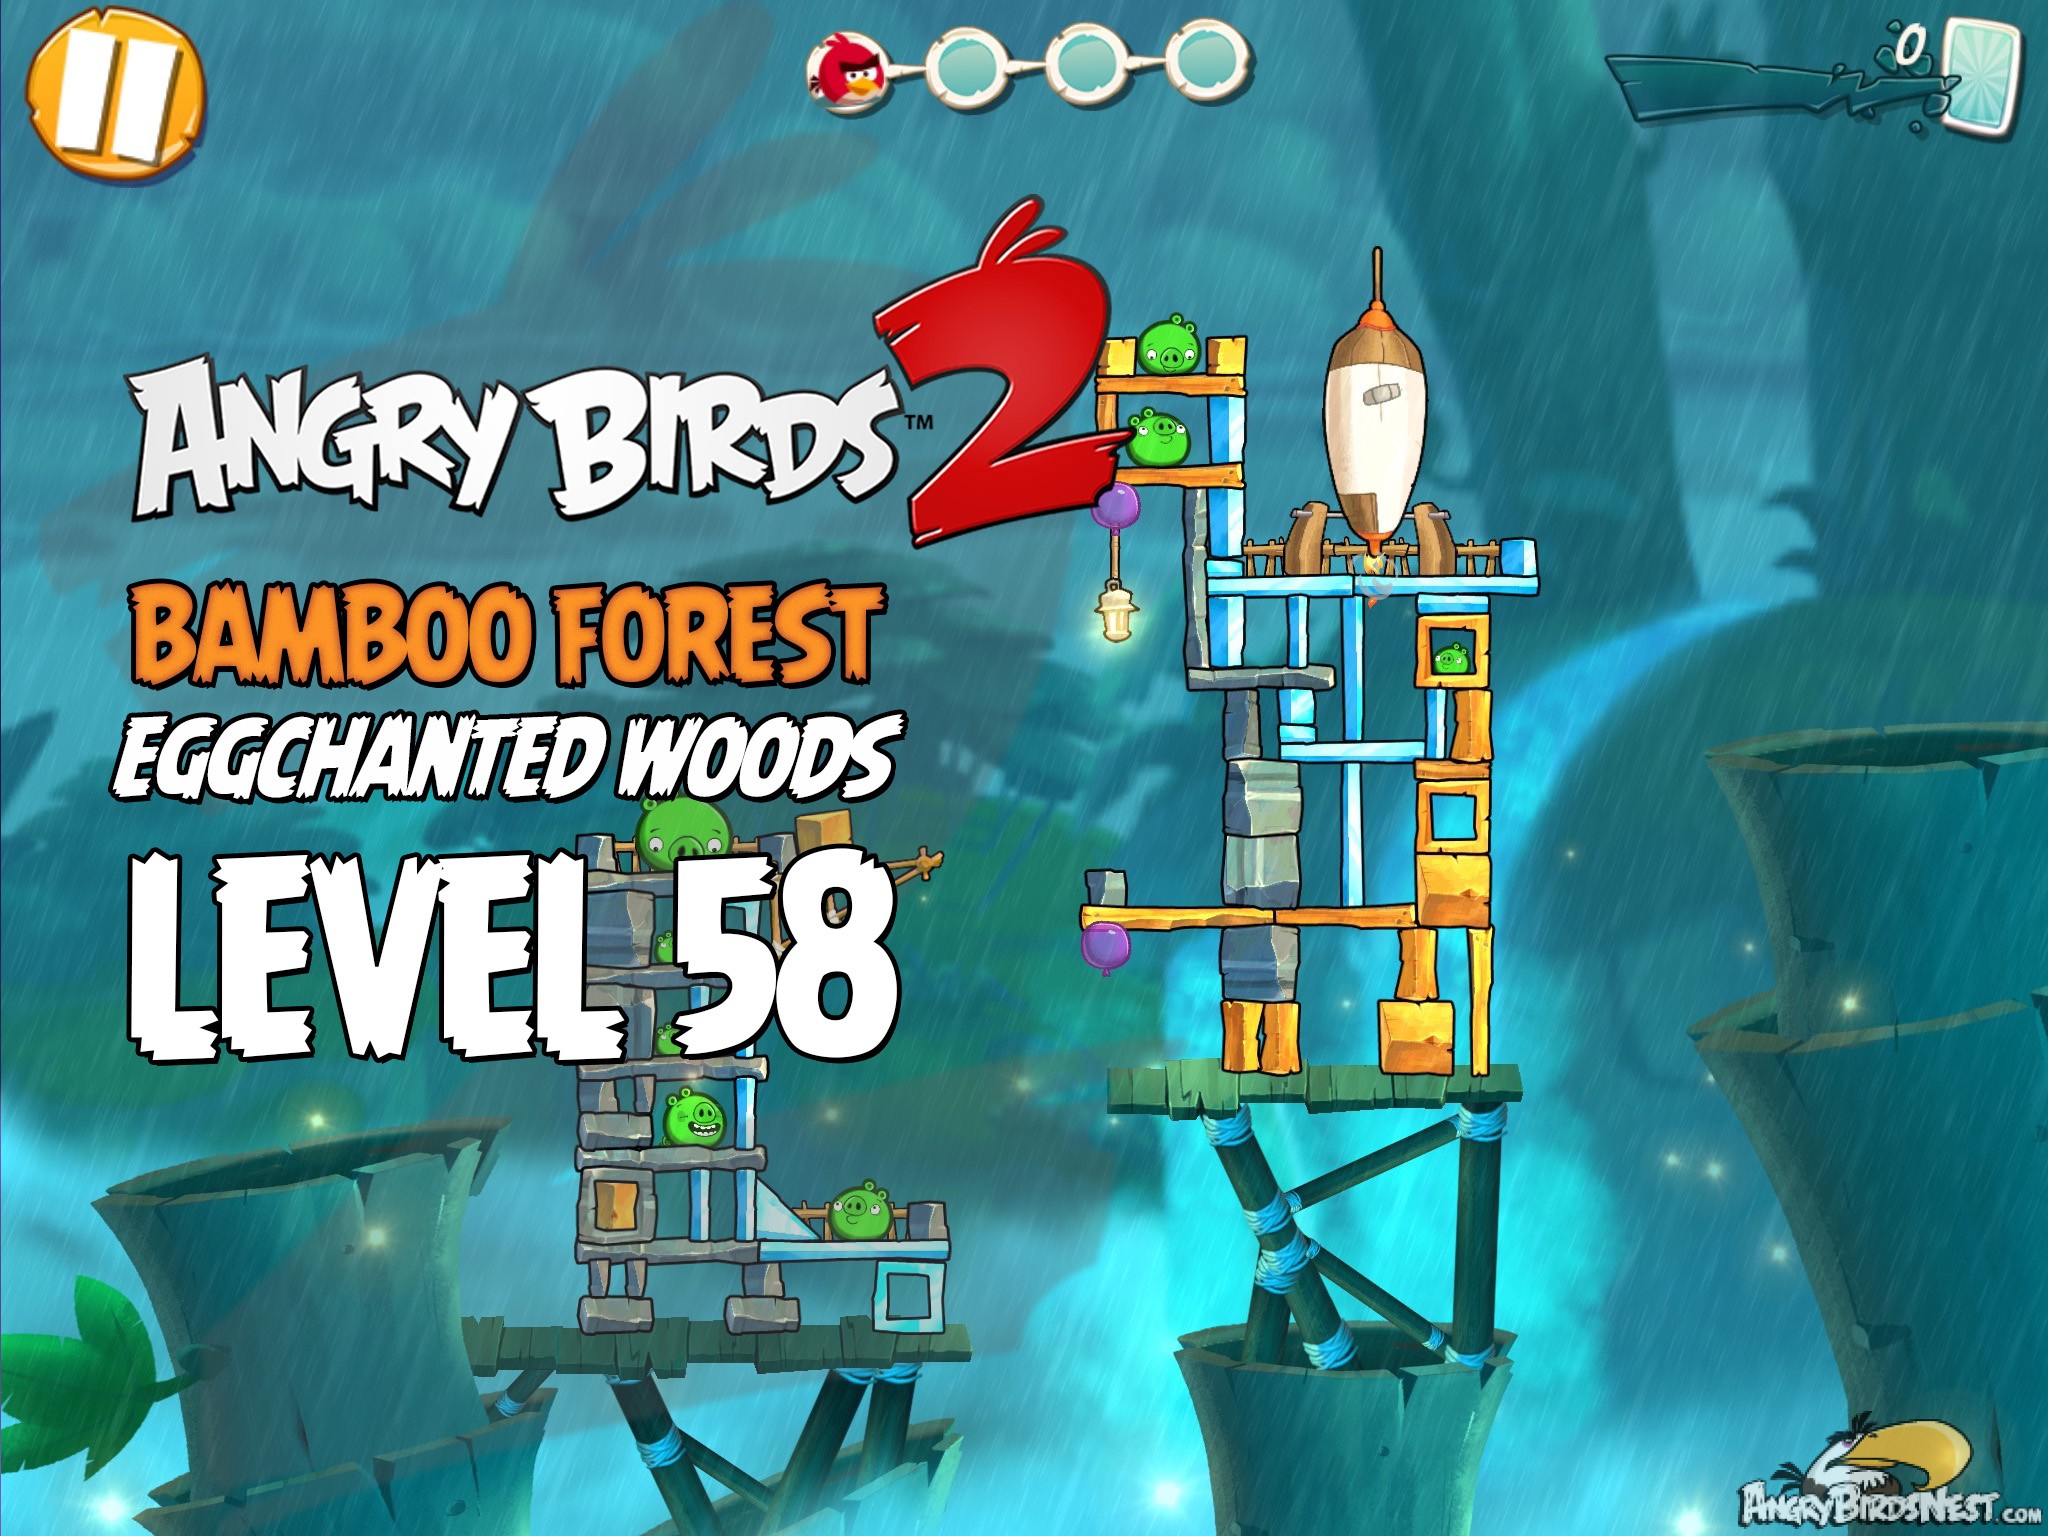 Angry Birds 2 Bamboo Forest Eggchanted Woods Level 58